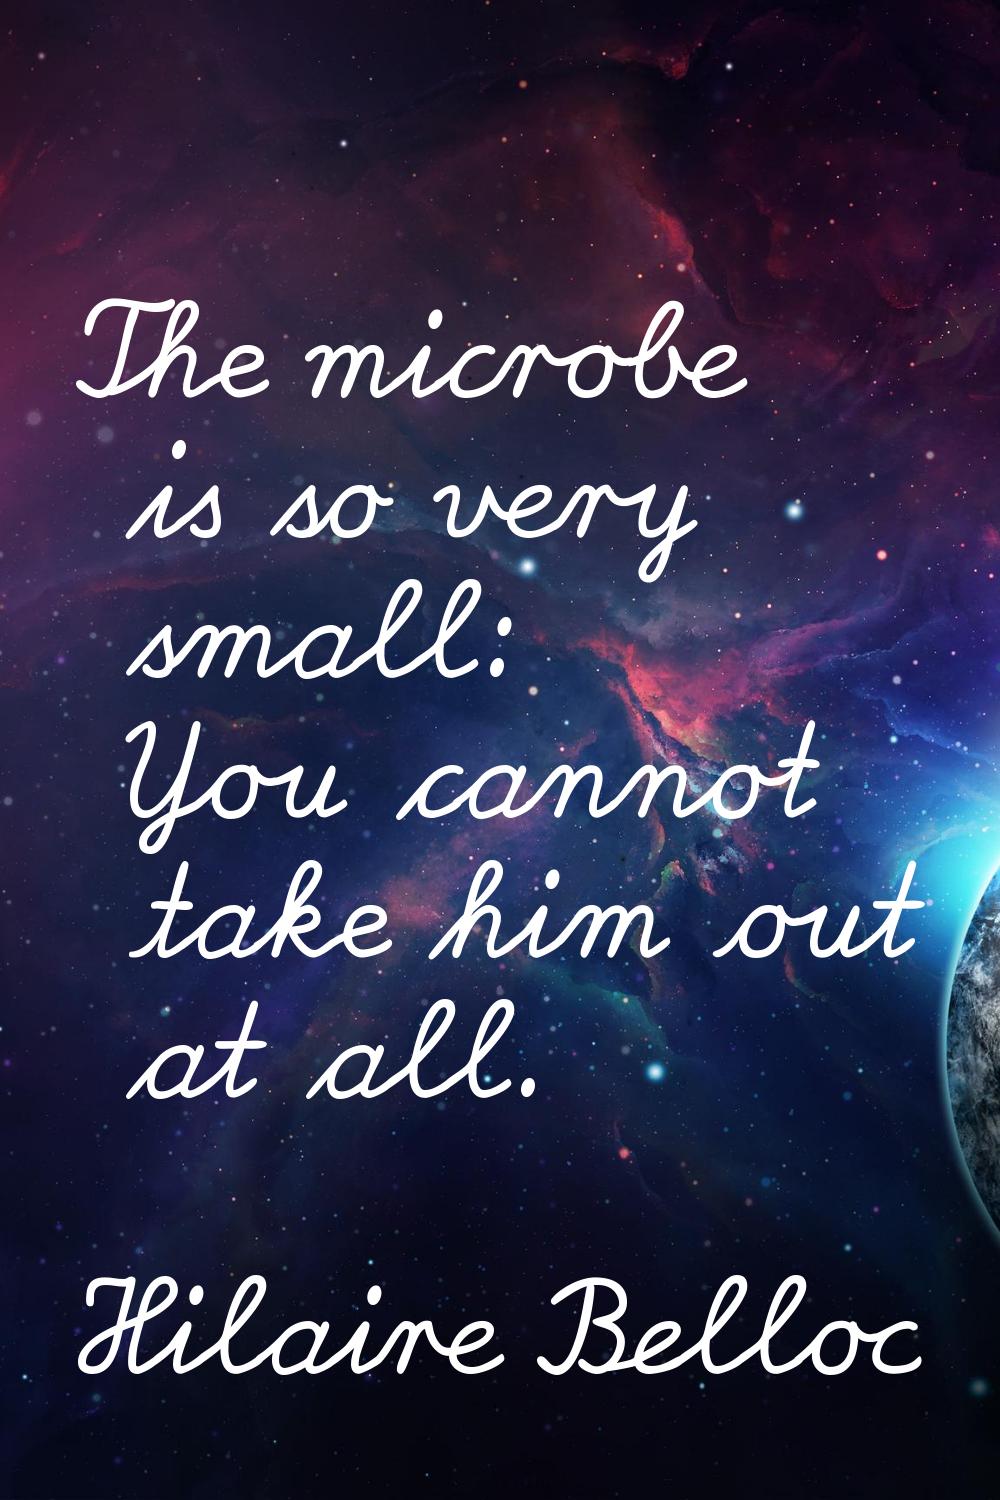 The microbe is so very small: You cannot take him out at all.